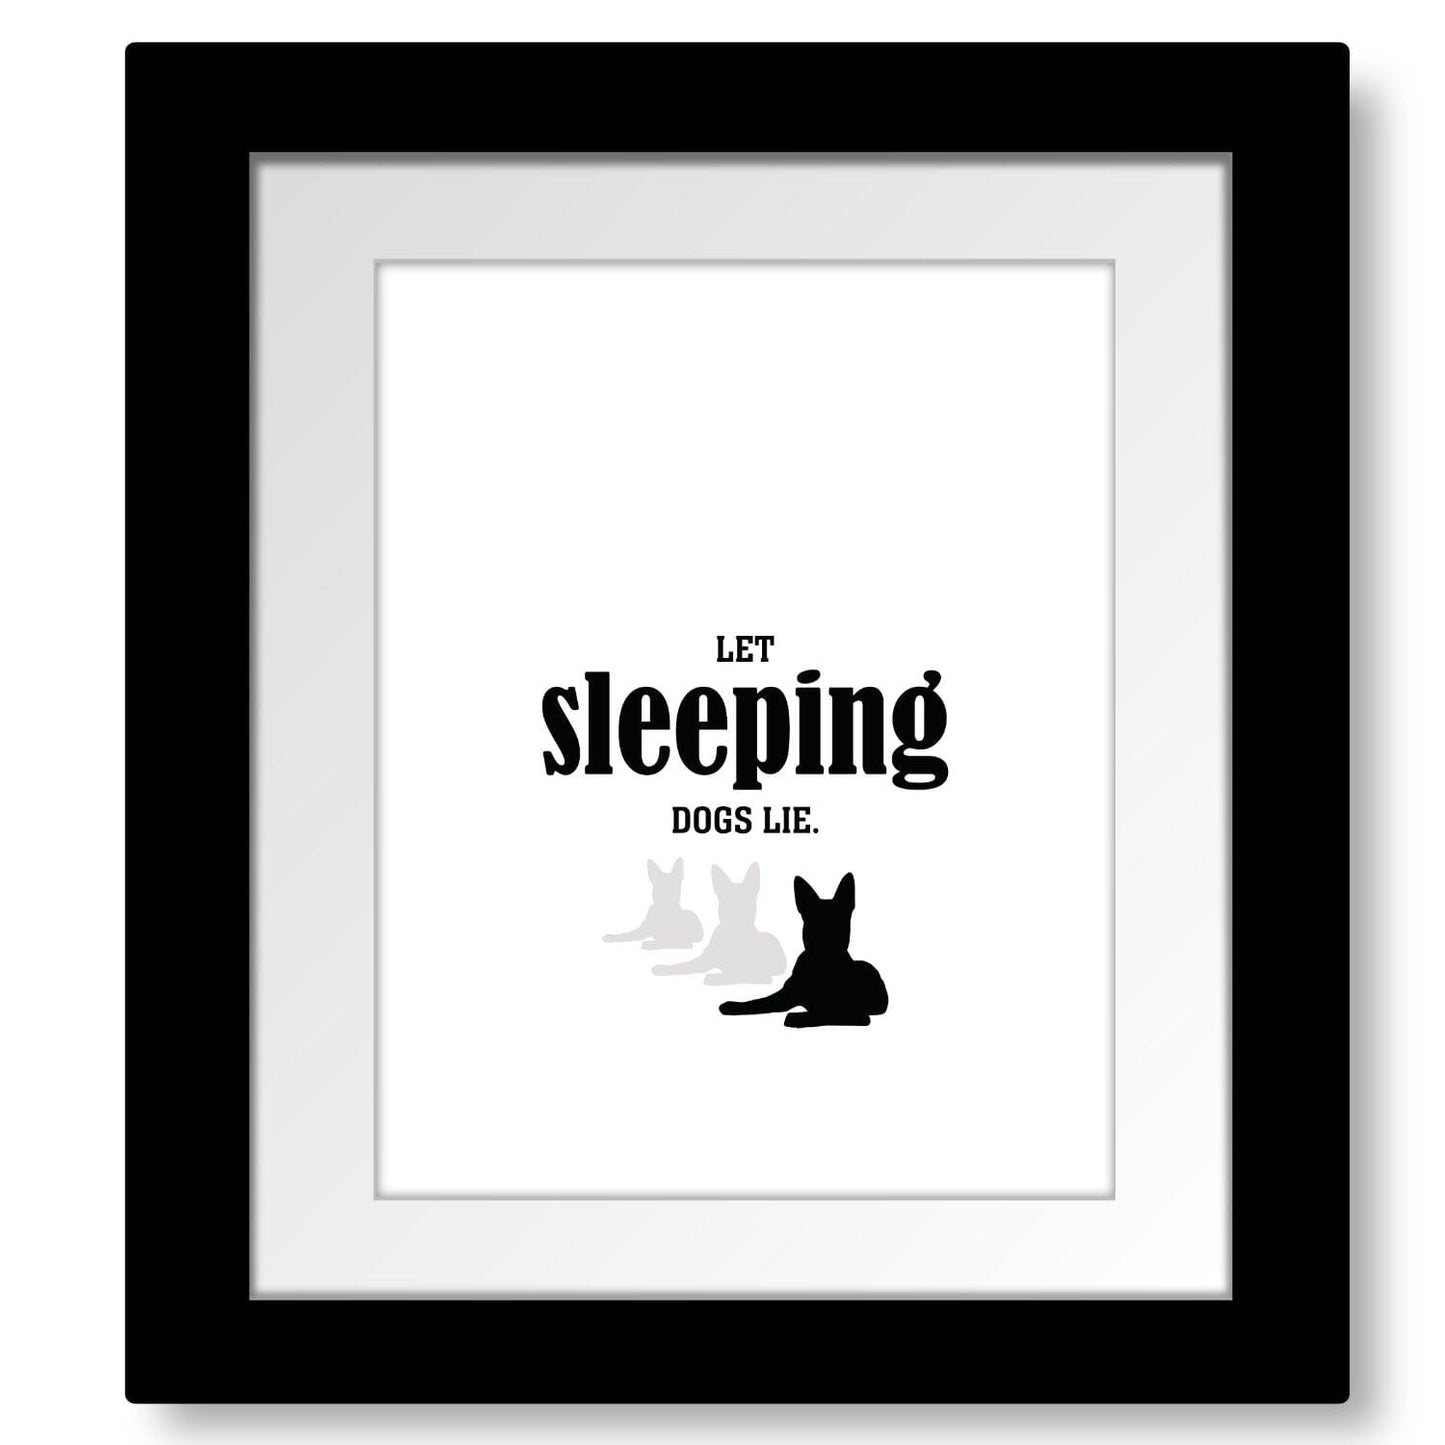 Let Sleeping Dogs Lie - Funny Wise and Witty Quote Wall Print Wise and Wiseass Quotes Song Lyrics Art 8x10 Framed and Matted Print 